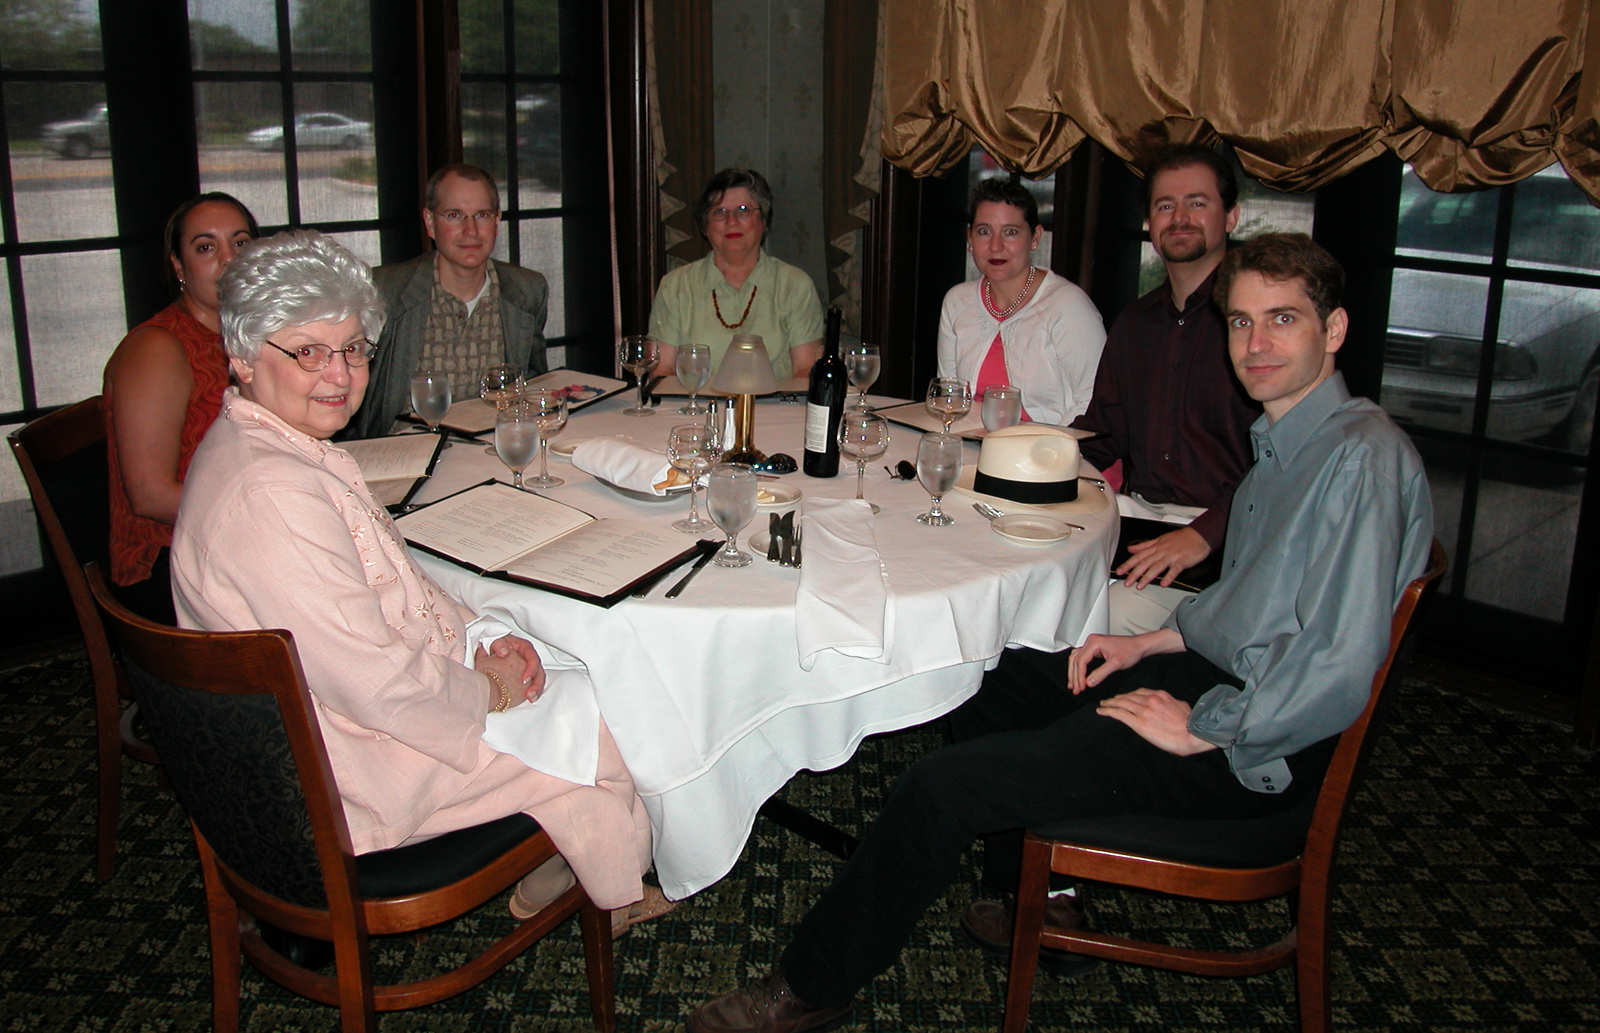 Mom, Marc's then-girlfriend Dara, Marc, Aunt Dory, Jackie and Steve, and Dan sitting in RUTH'S CHRIS Steak House® for Mother's Day meal